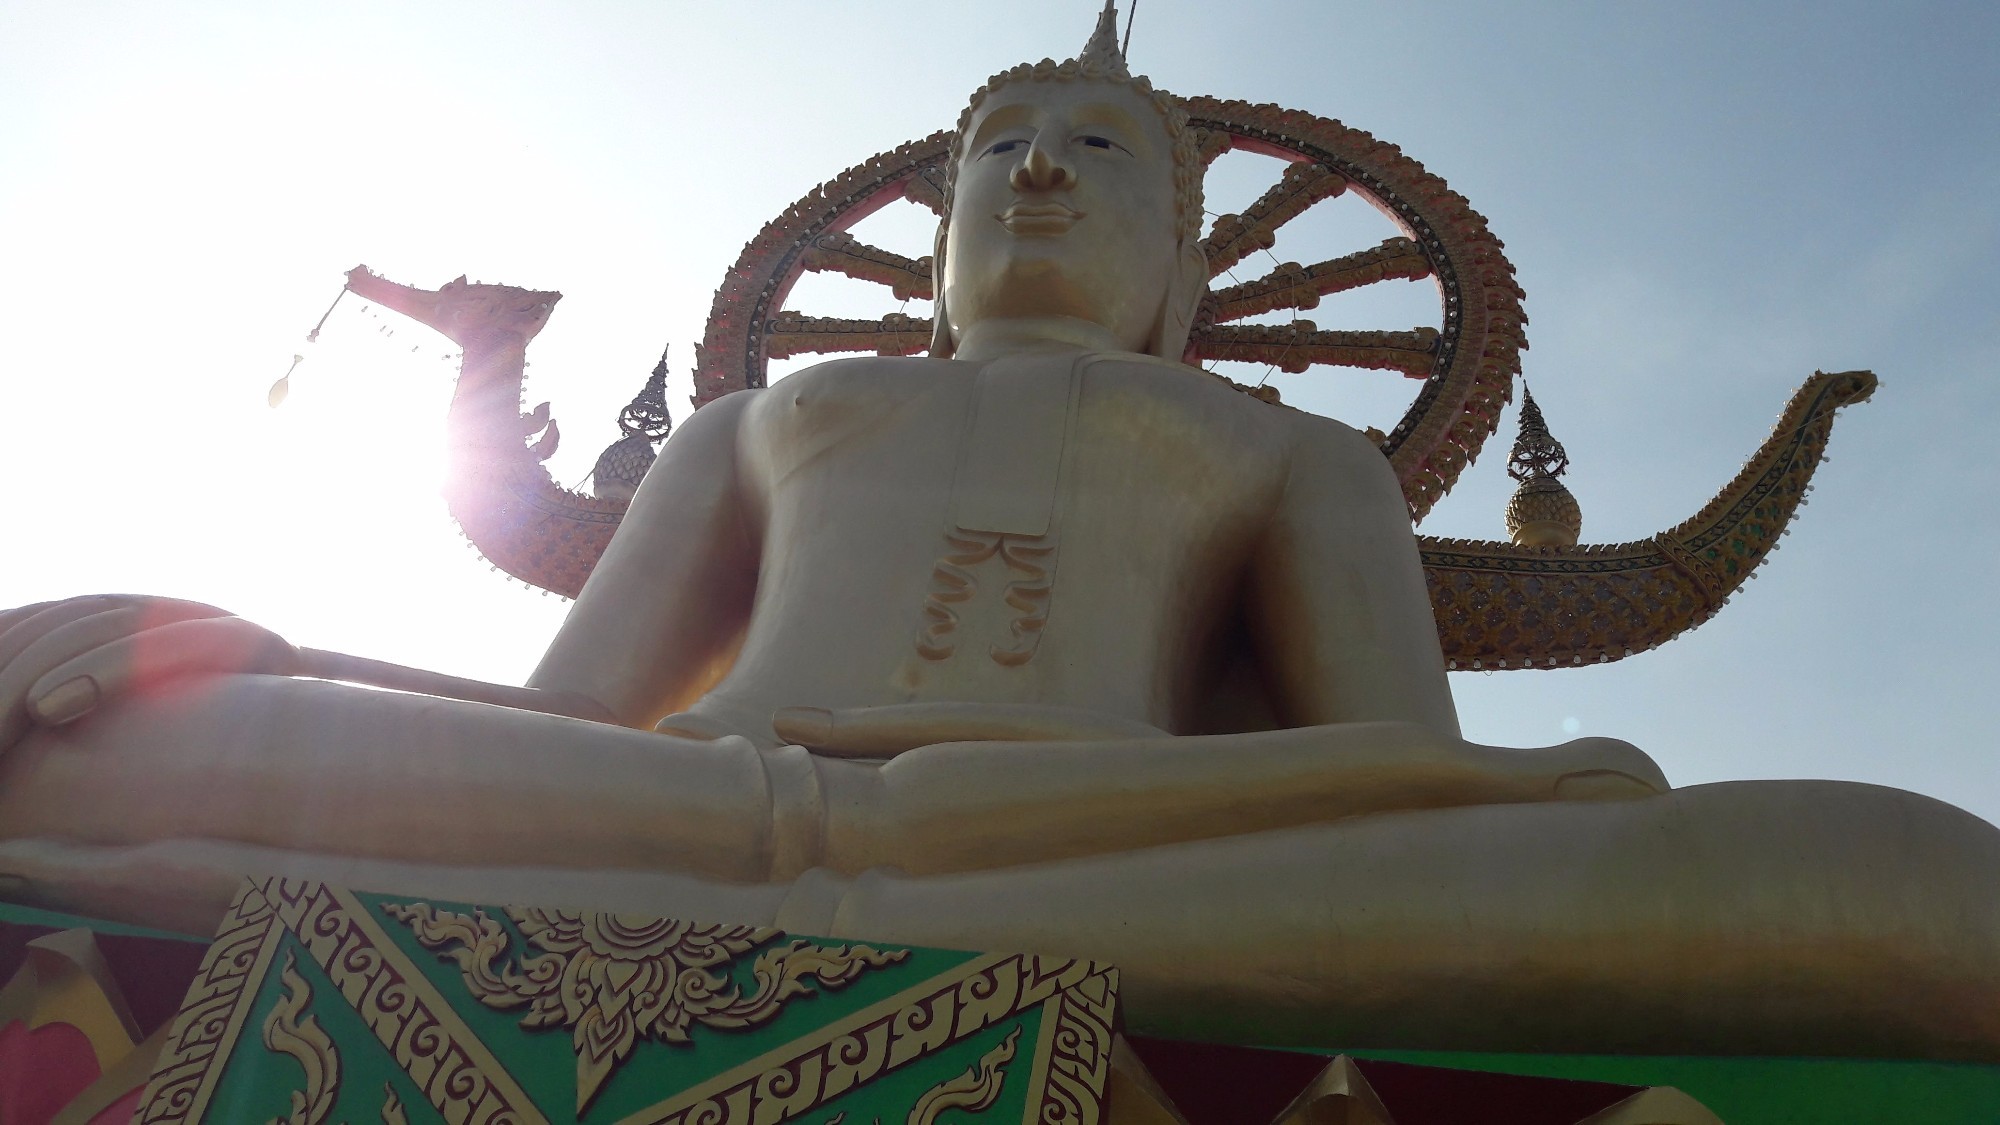 Statue of Golden Buddha — you can go there with a tour or by motorbike yorself.